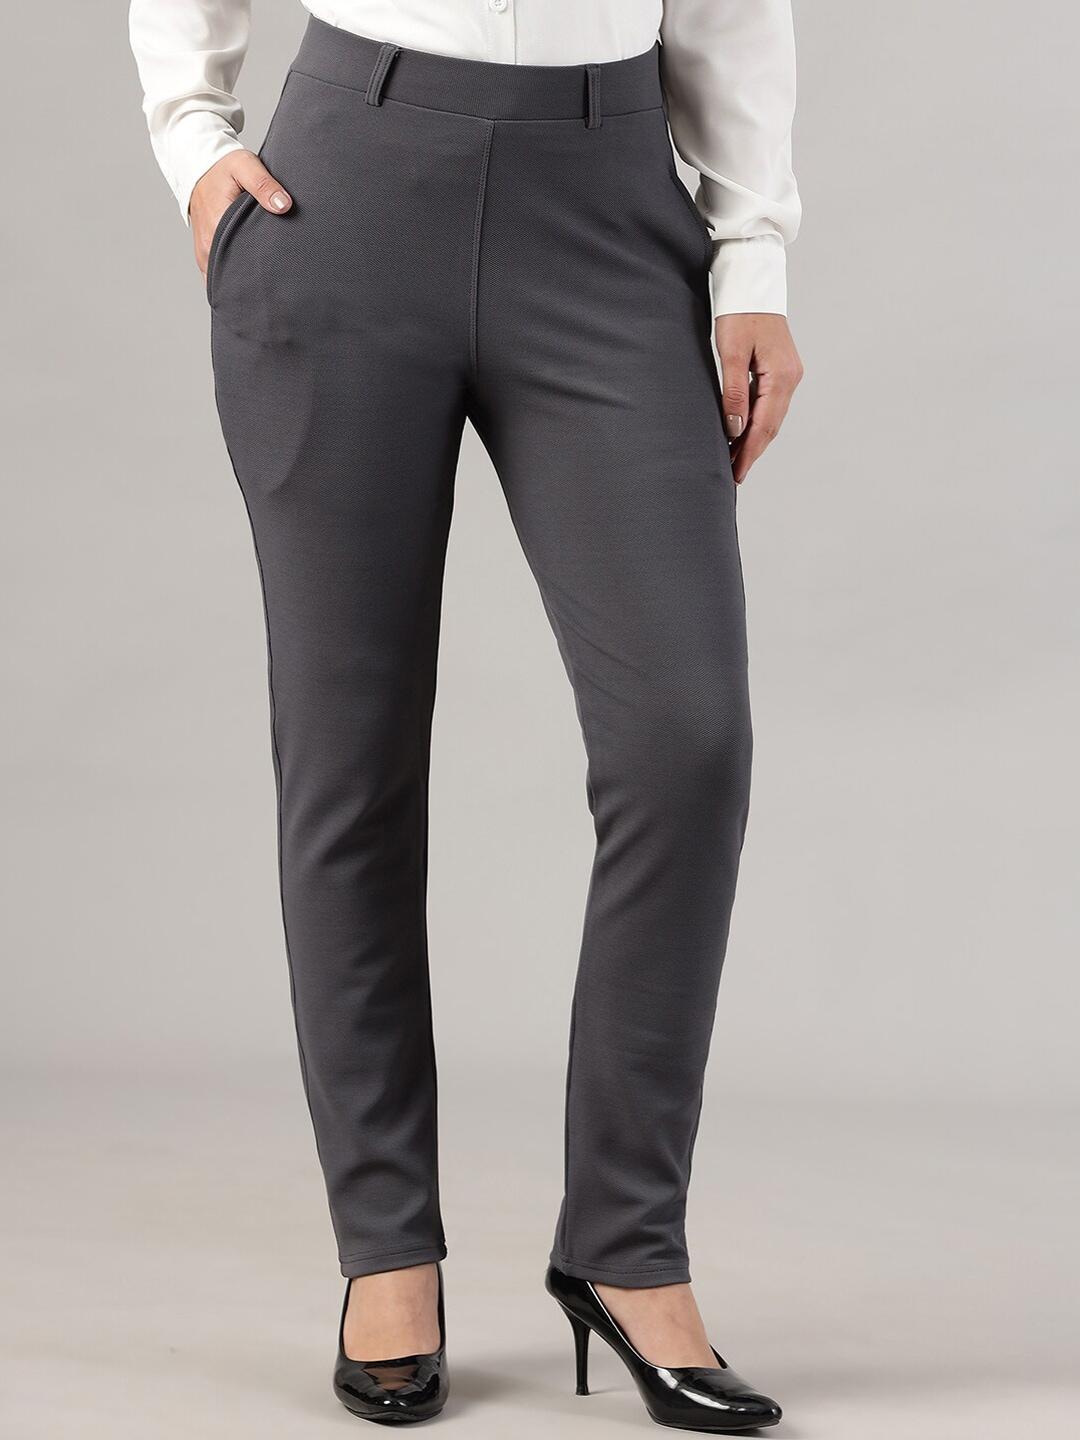 fithub women slim fit high-rise formal trousers